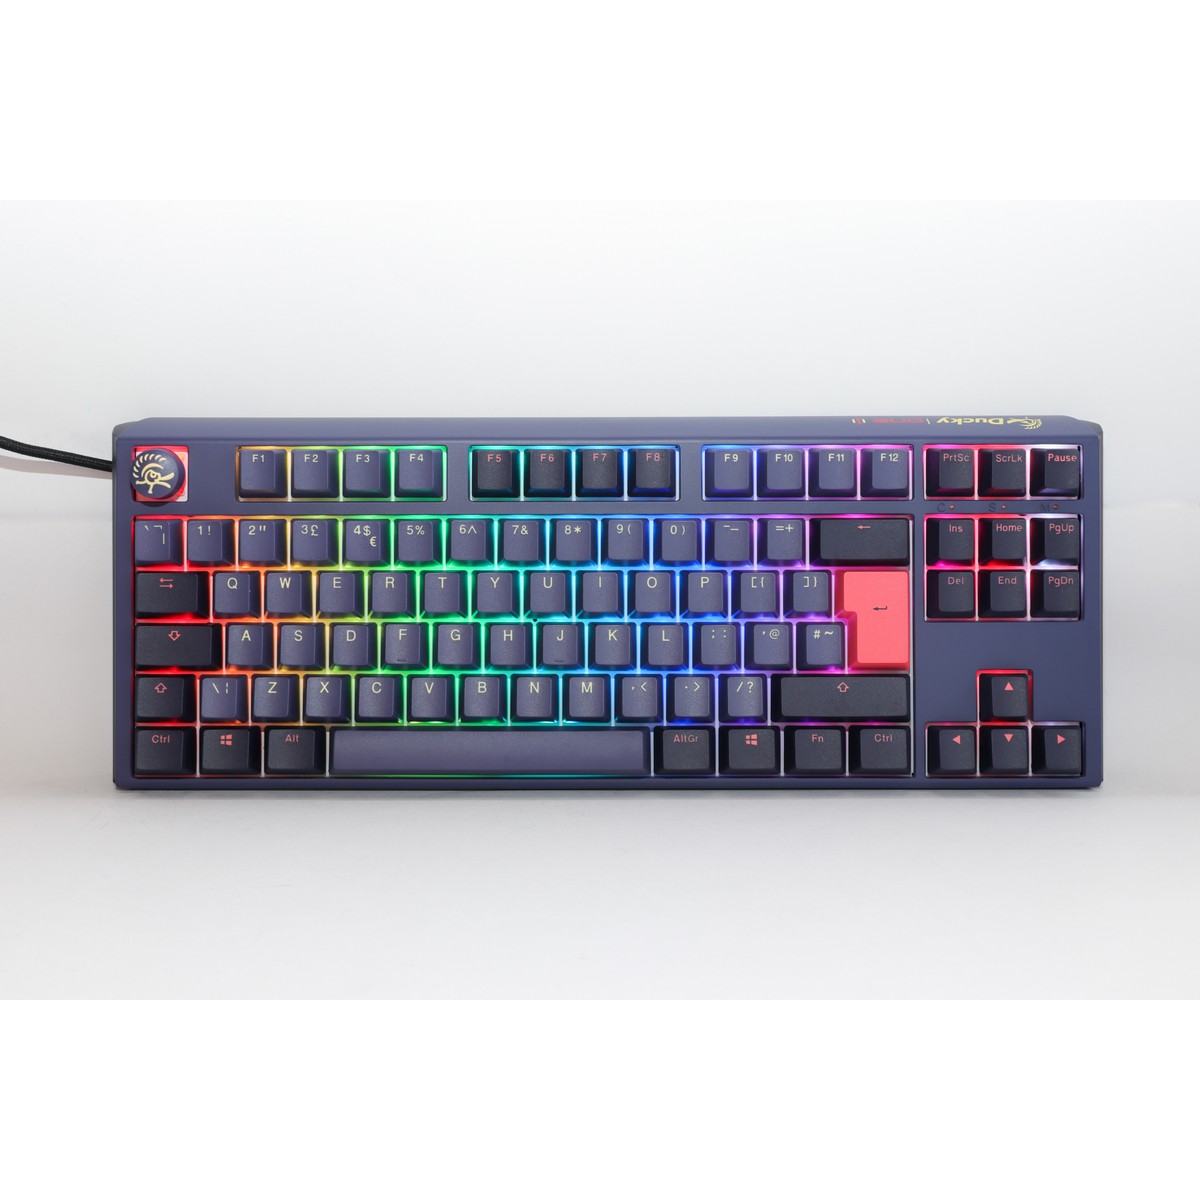 Ducky - Ducky One 3 Cosmic TKL 80% USB RGB Mechanical Gaming Keyboard Cherry MX Silent Red Switch - UK Layout